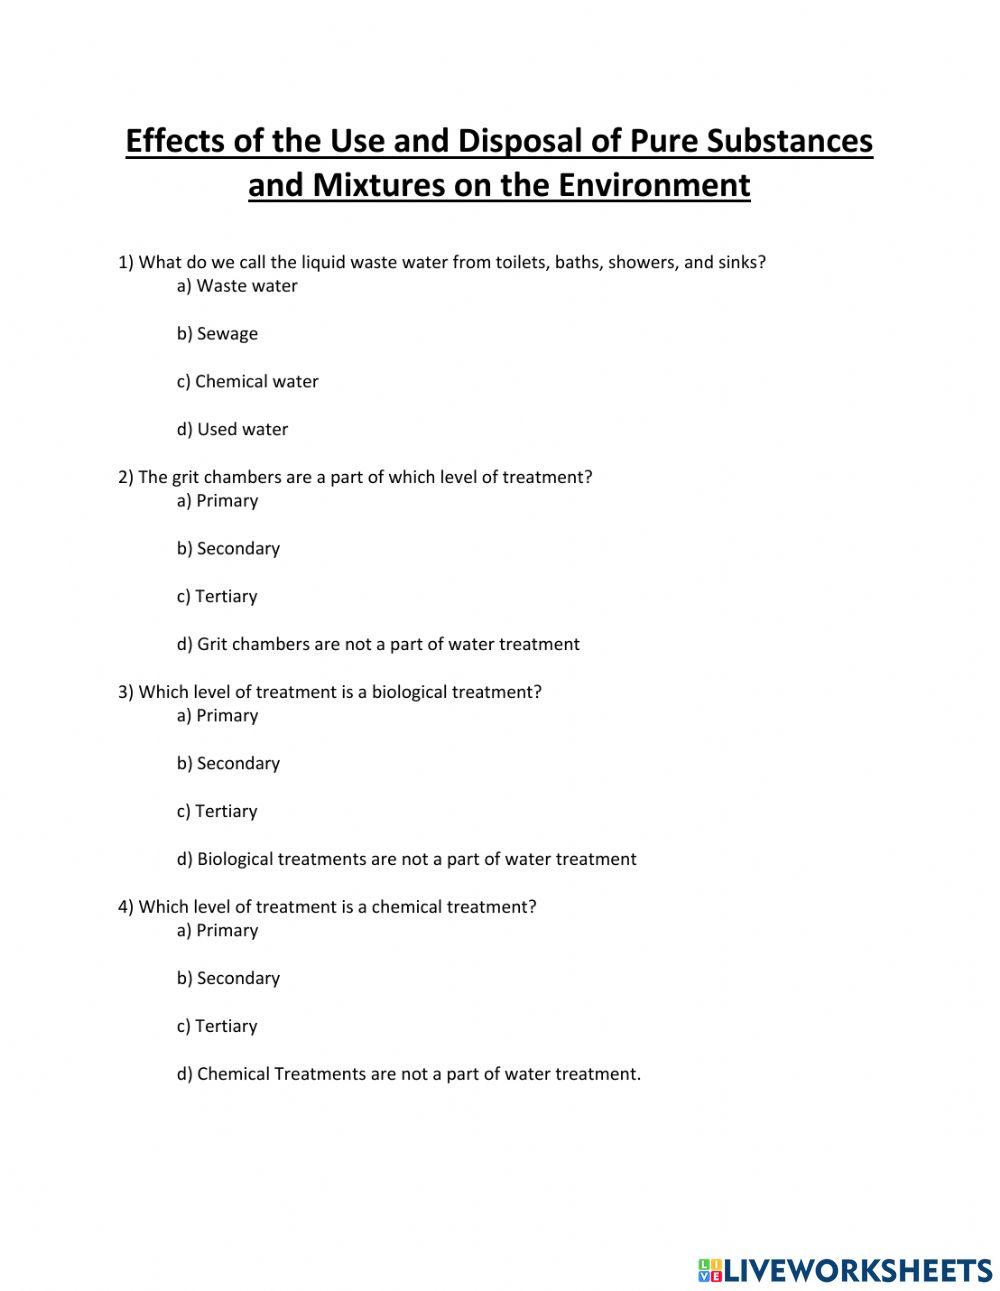 Environmental Impacts of Pure Substances and Mixtures